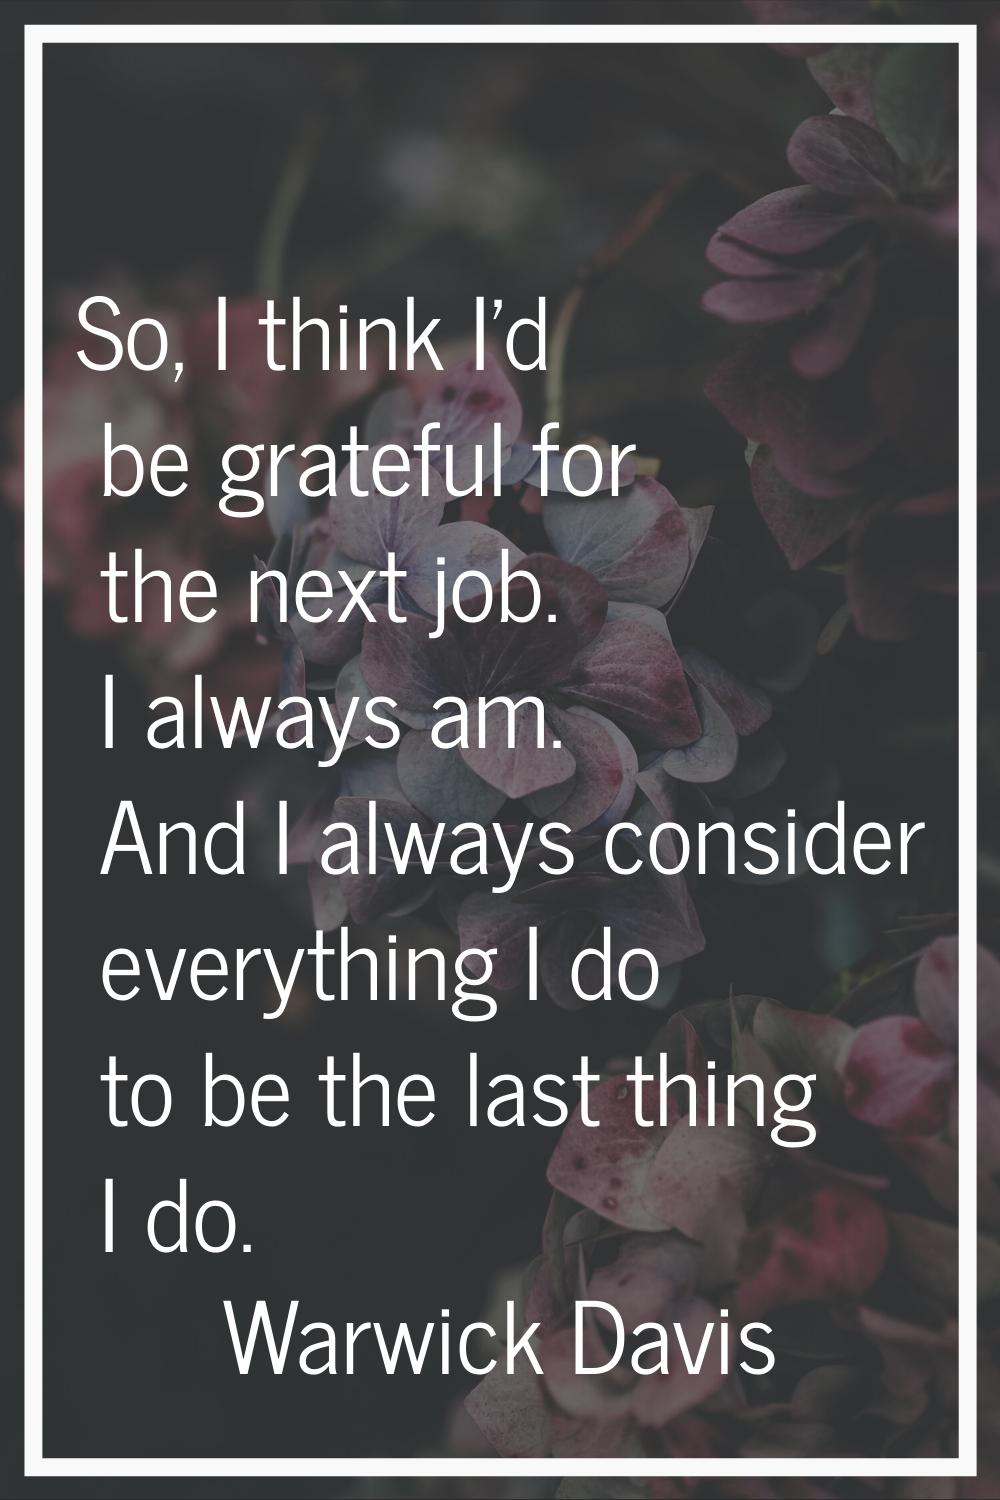 So, I think I'd be grateful for the next job. I always am. And I always consider everything I do to